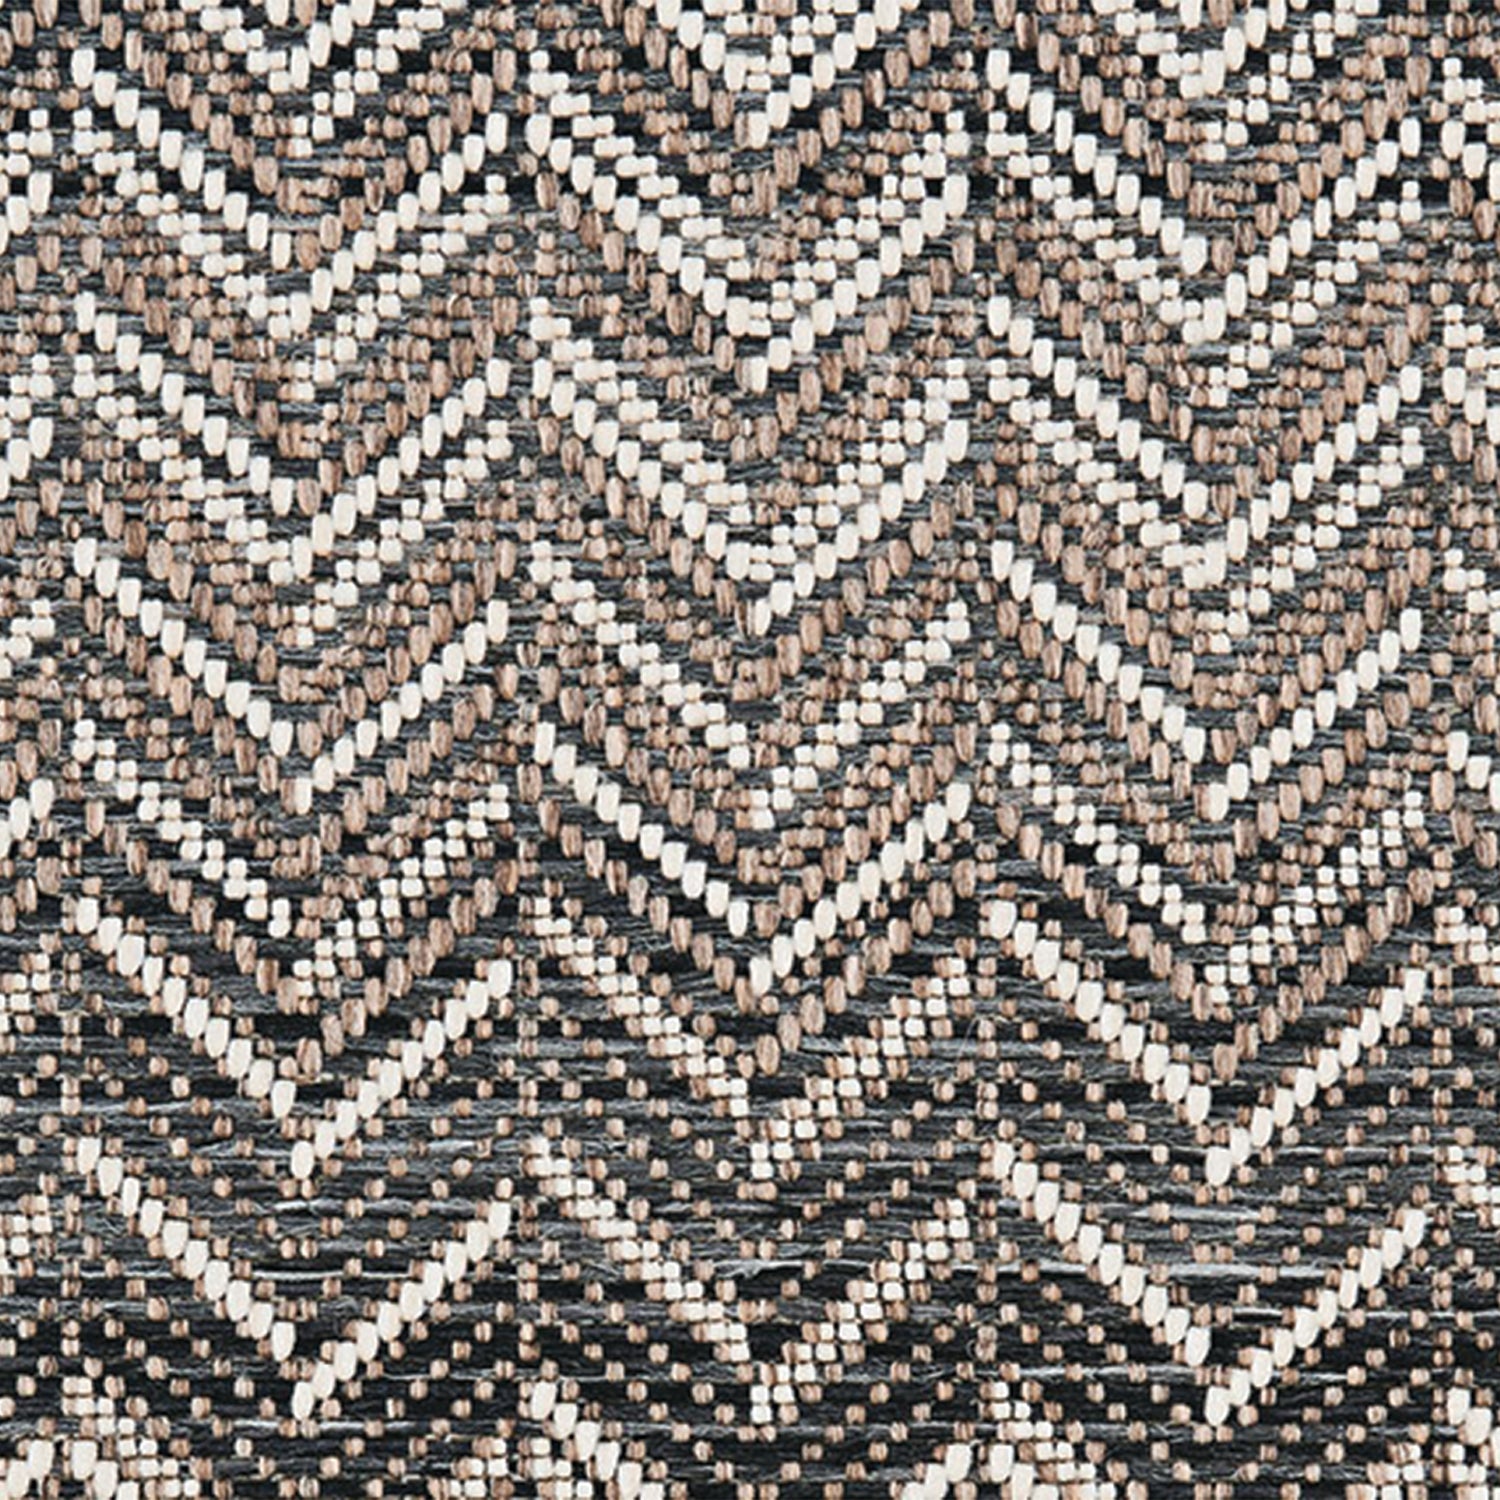 Outdoor broadloom carpet swatch in a striped herringbone weave in gray, tan and white.